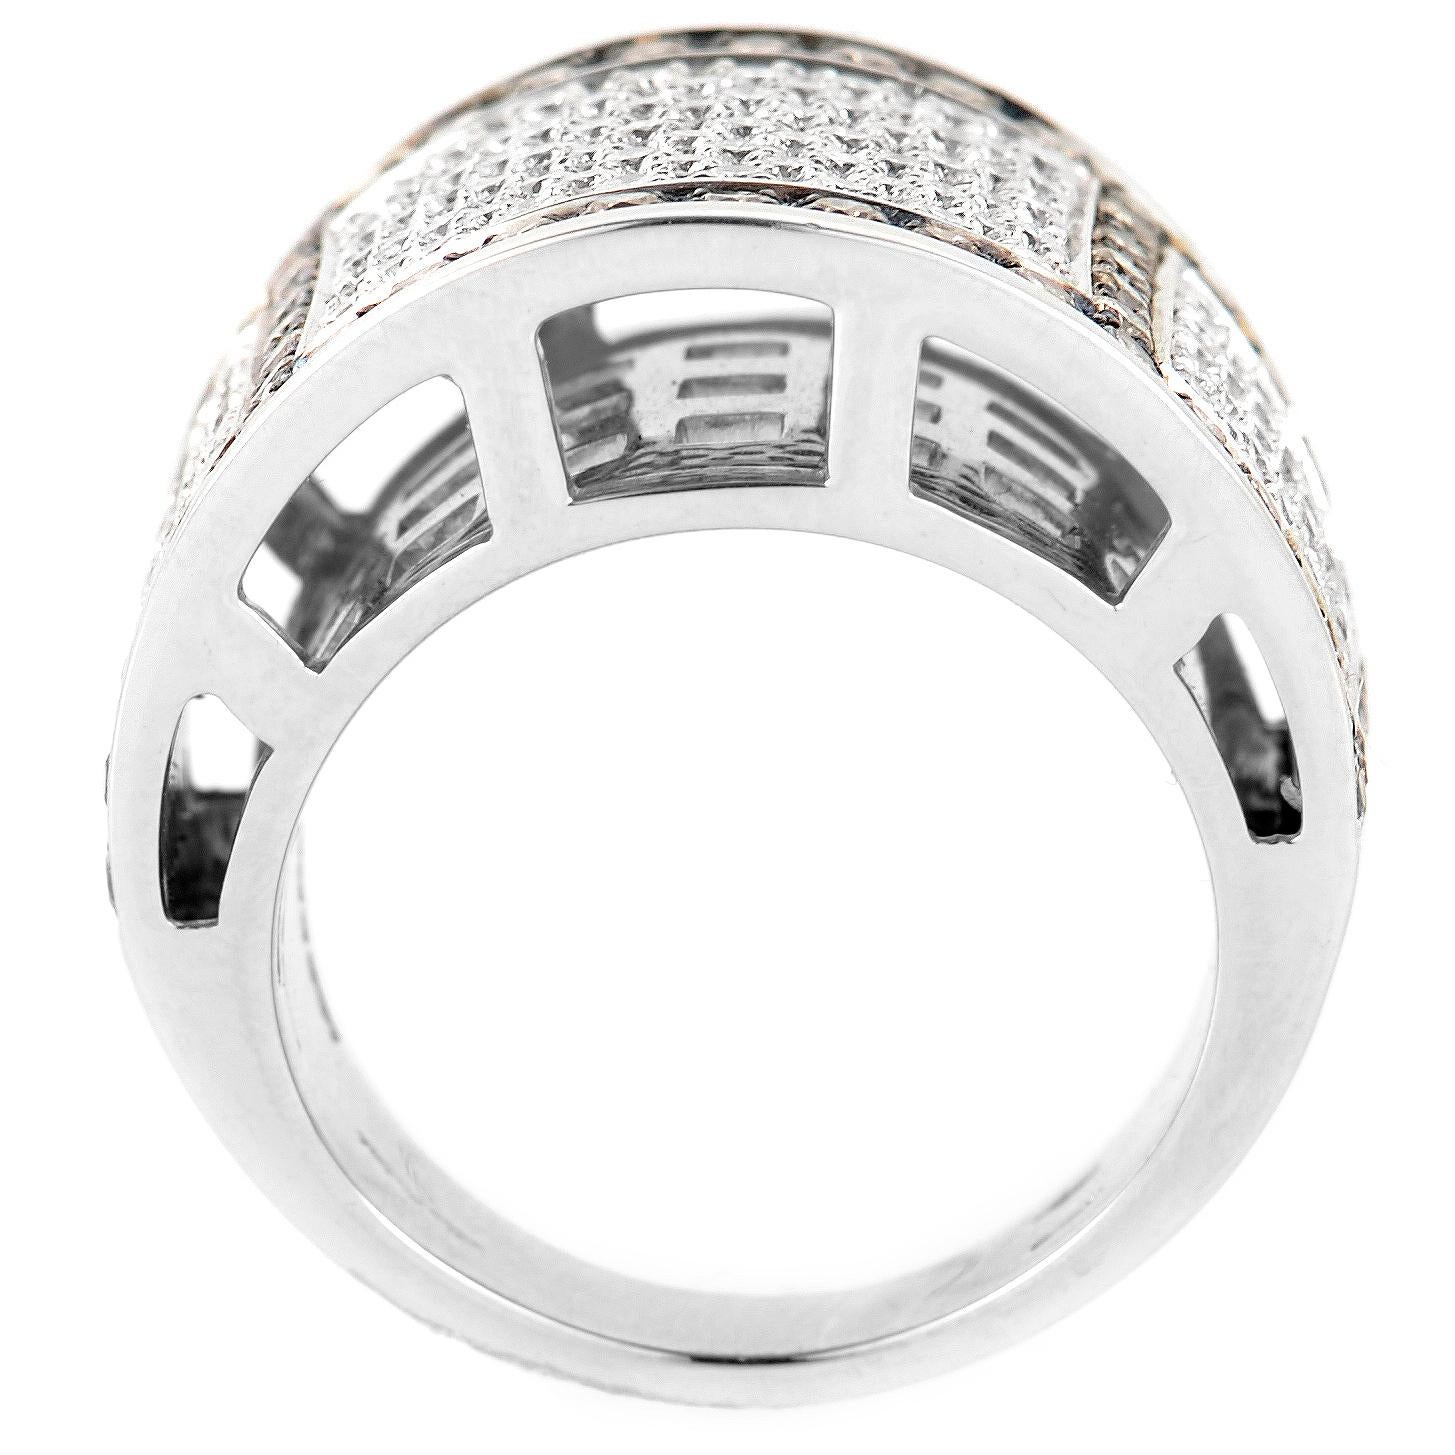 This band ring from Salvini is sensual and shimmers with diamonds. It is made of 18K white gold and is set with a luxurious diamond pave comprised of ~2.75ct of cognac and white diamonds.
